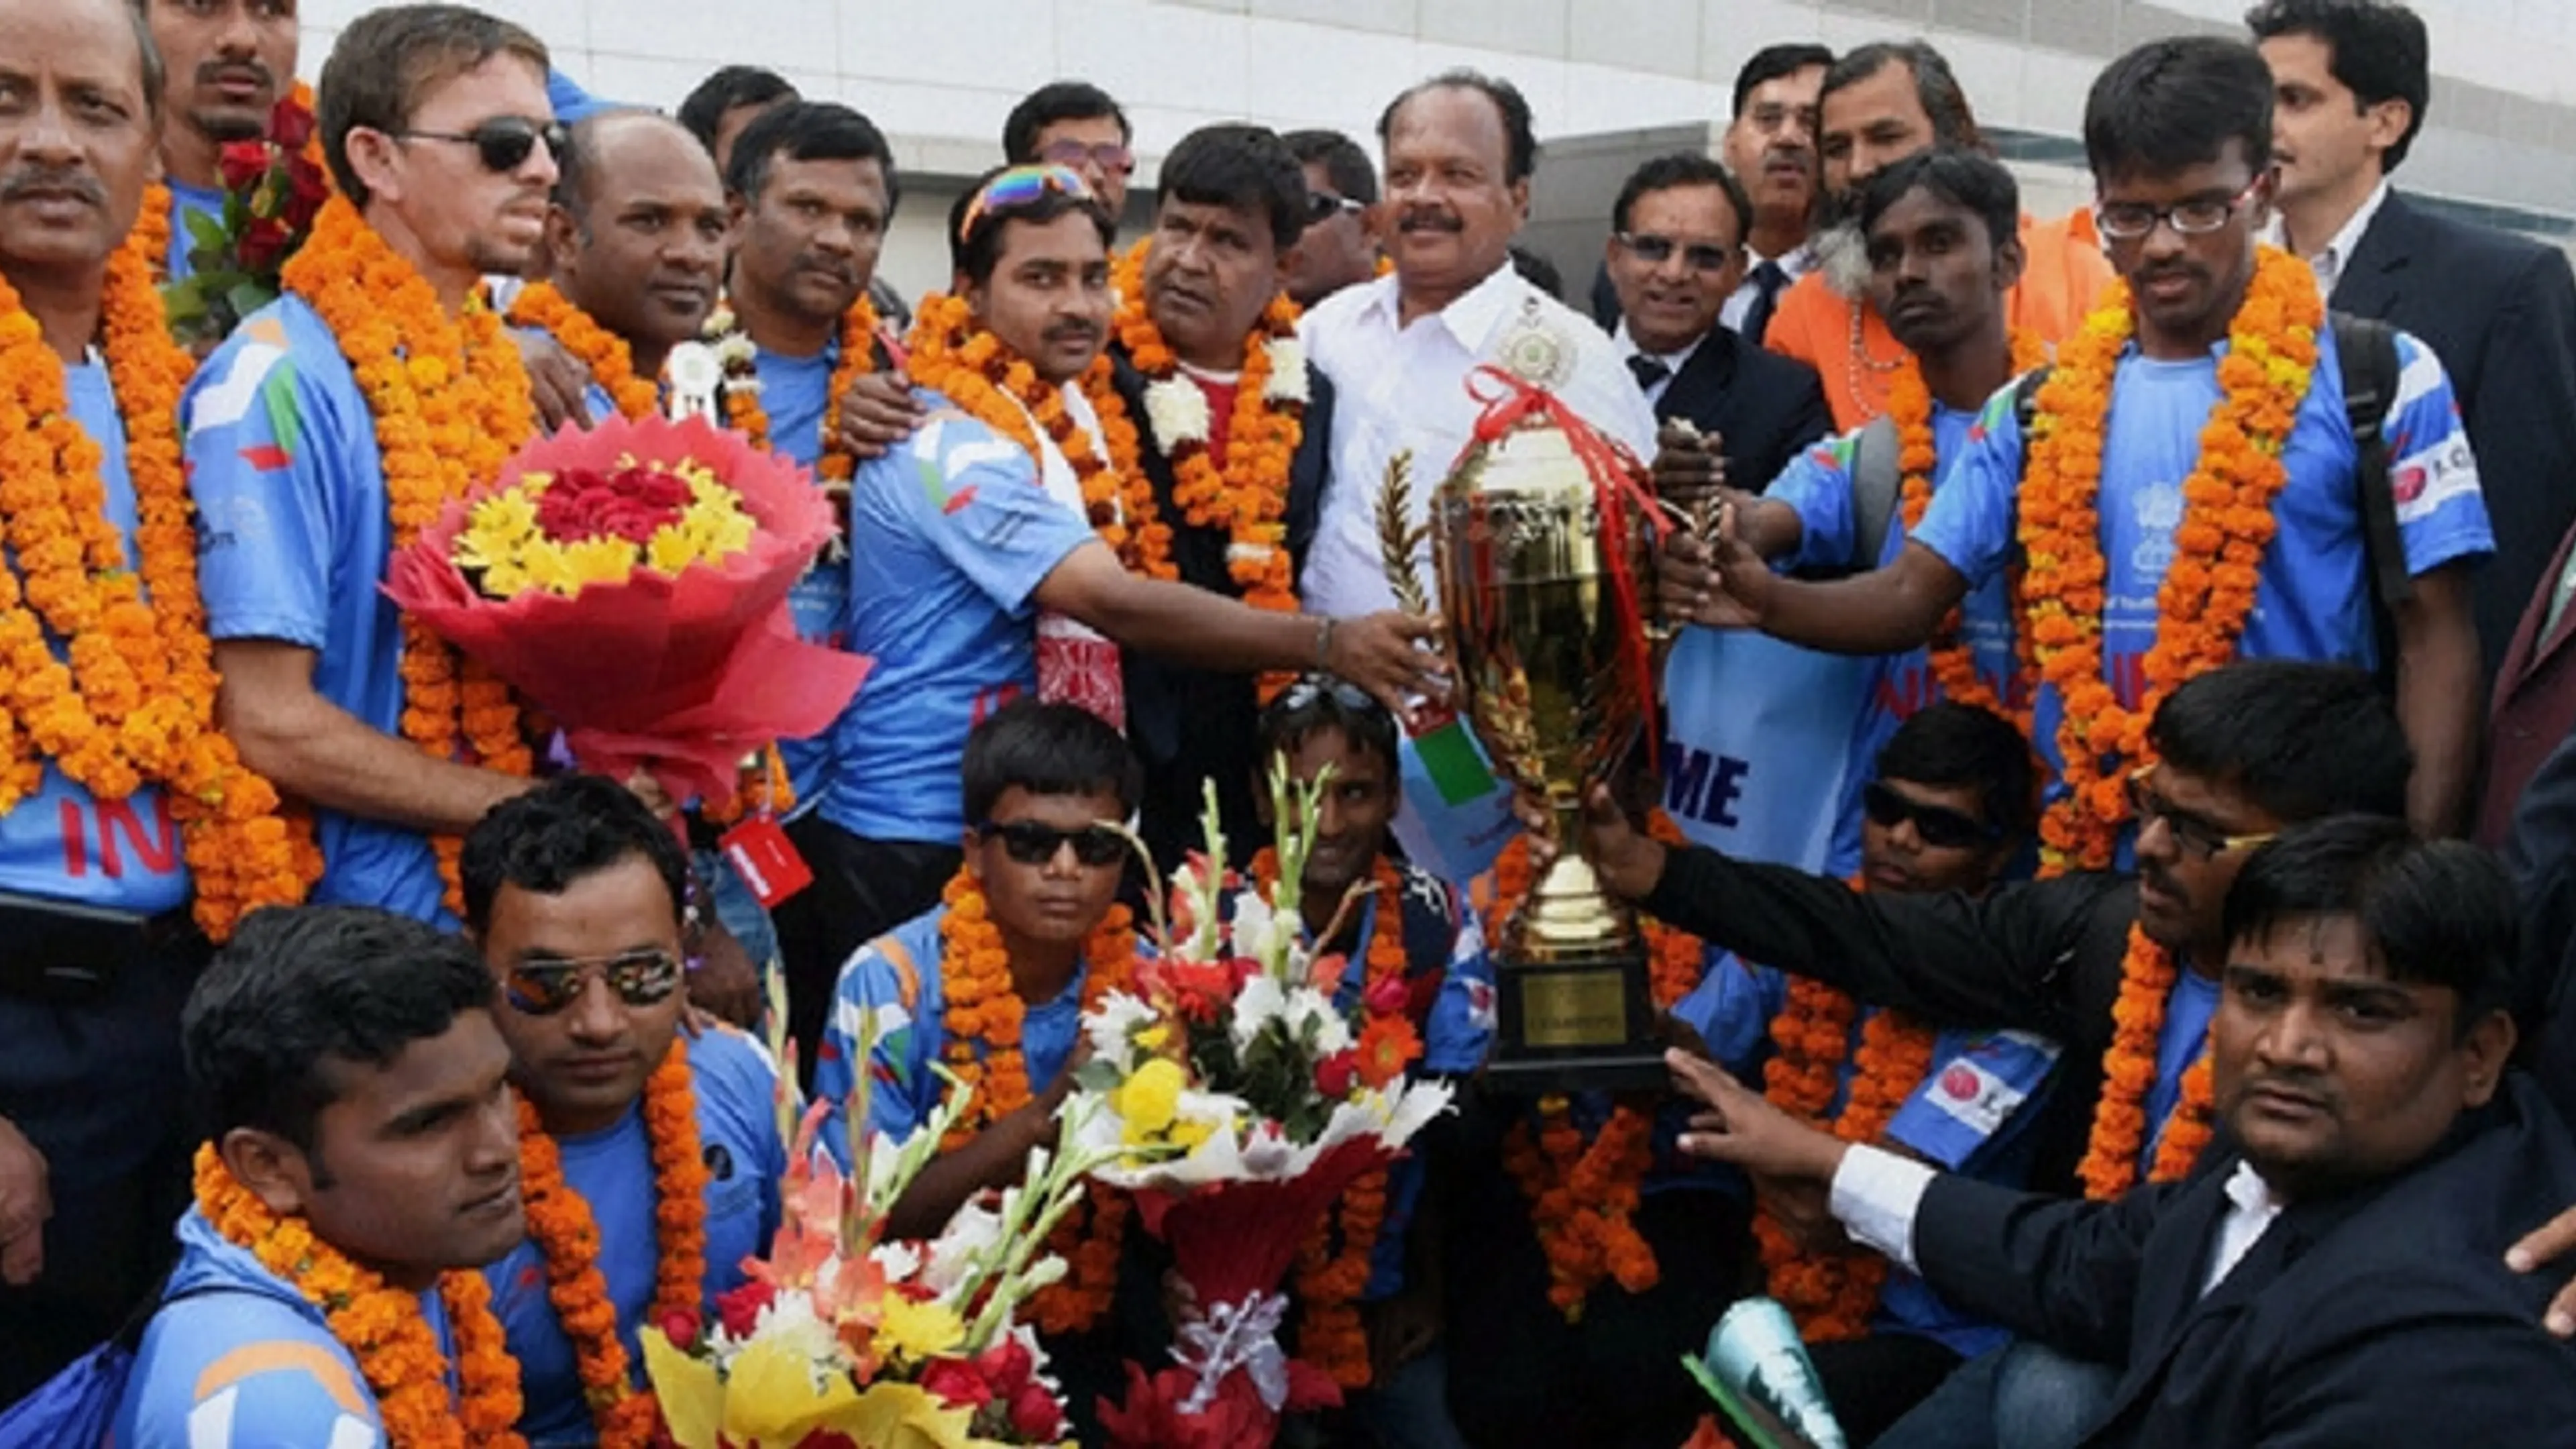 India wins T20 Blind Cricket World Cup, defeats Pakistan by 9 wickets